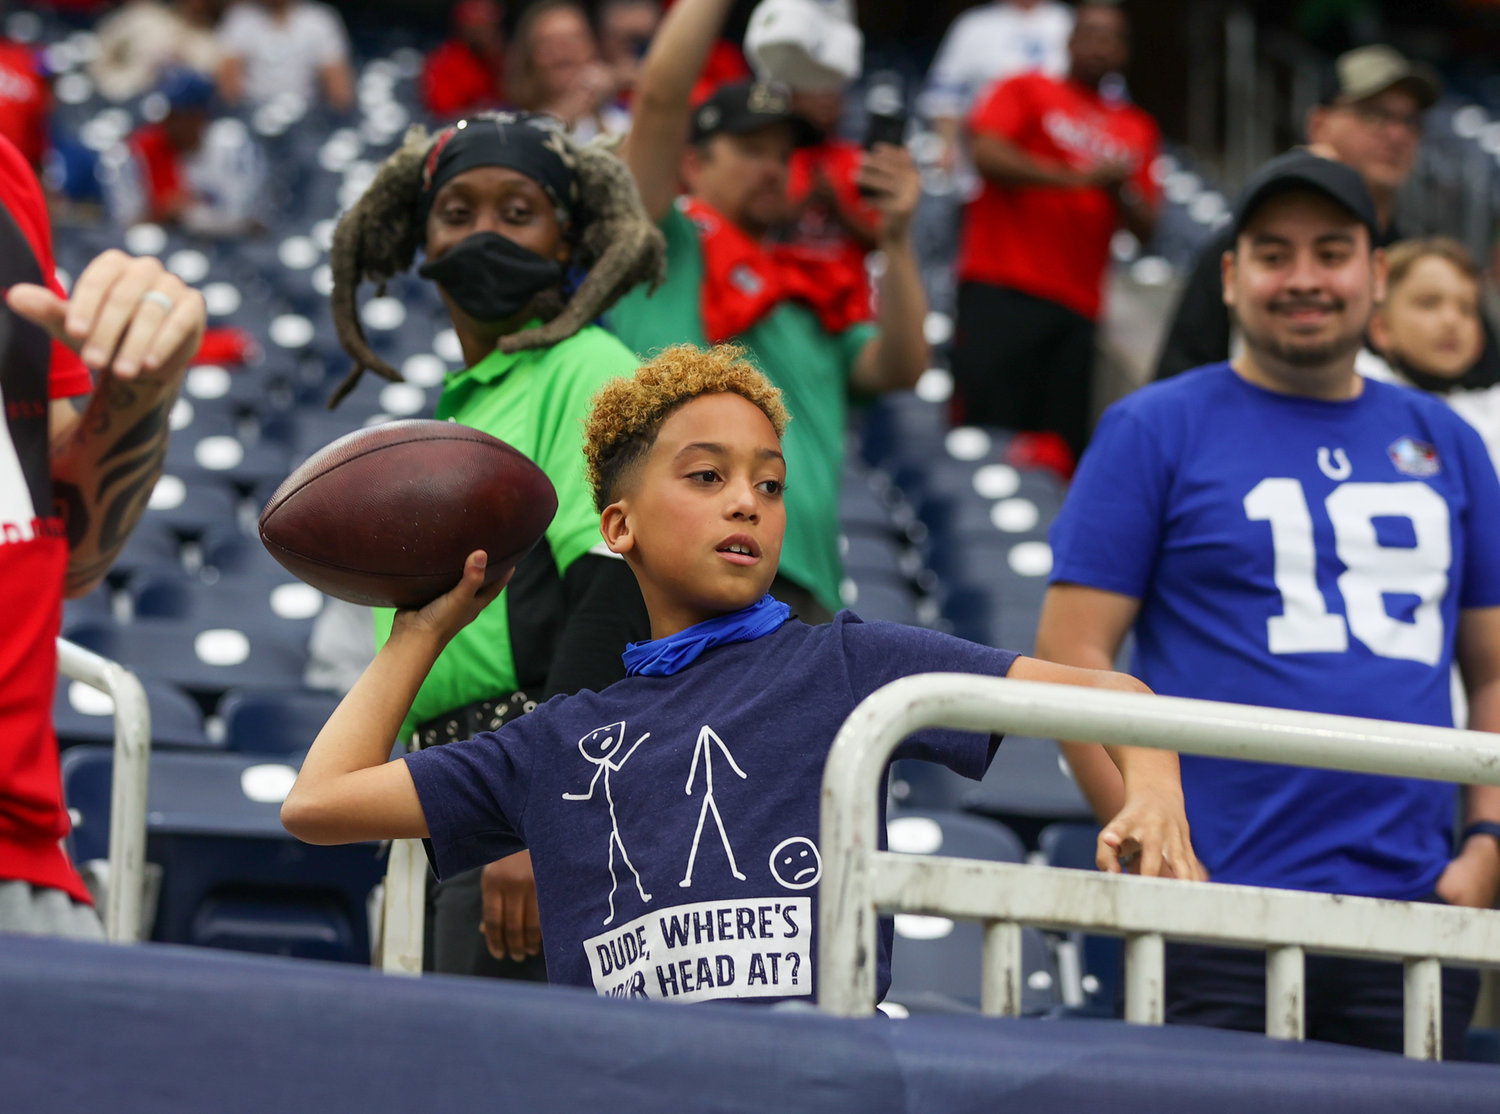 A fan plays catch with Indianapolis Colts wide receiver Zach Pascal (14) before the start of an NFL game between the Texans and the Colts on December 5, 2021 in Houston, Texas.